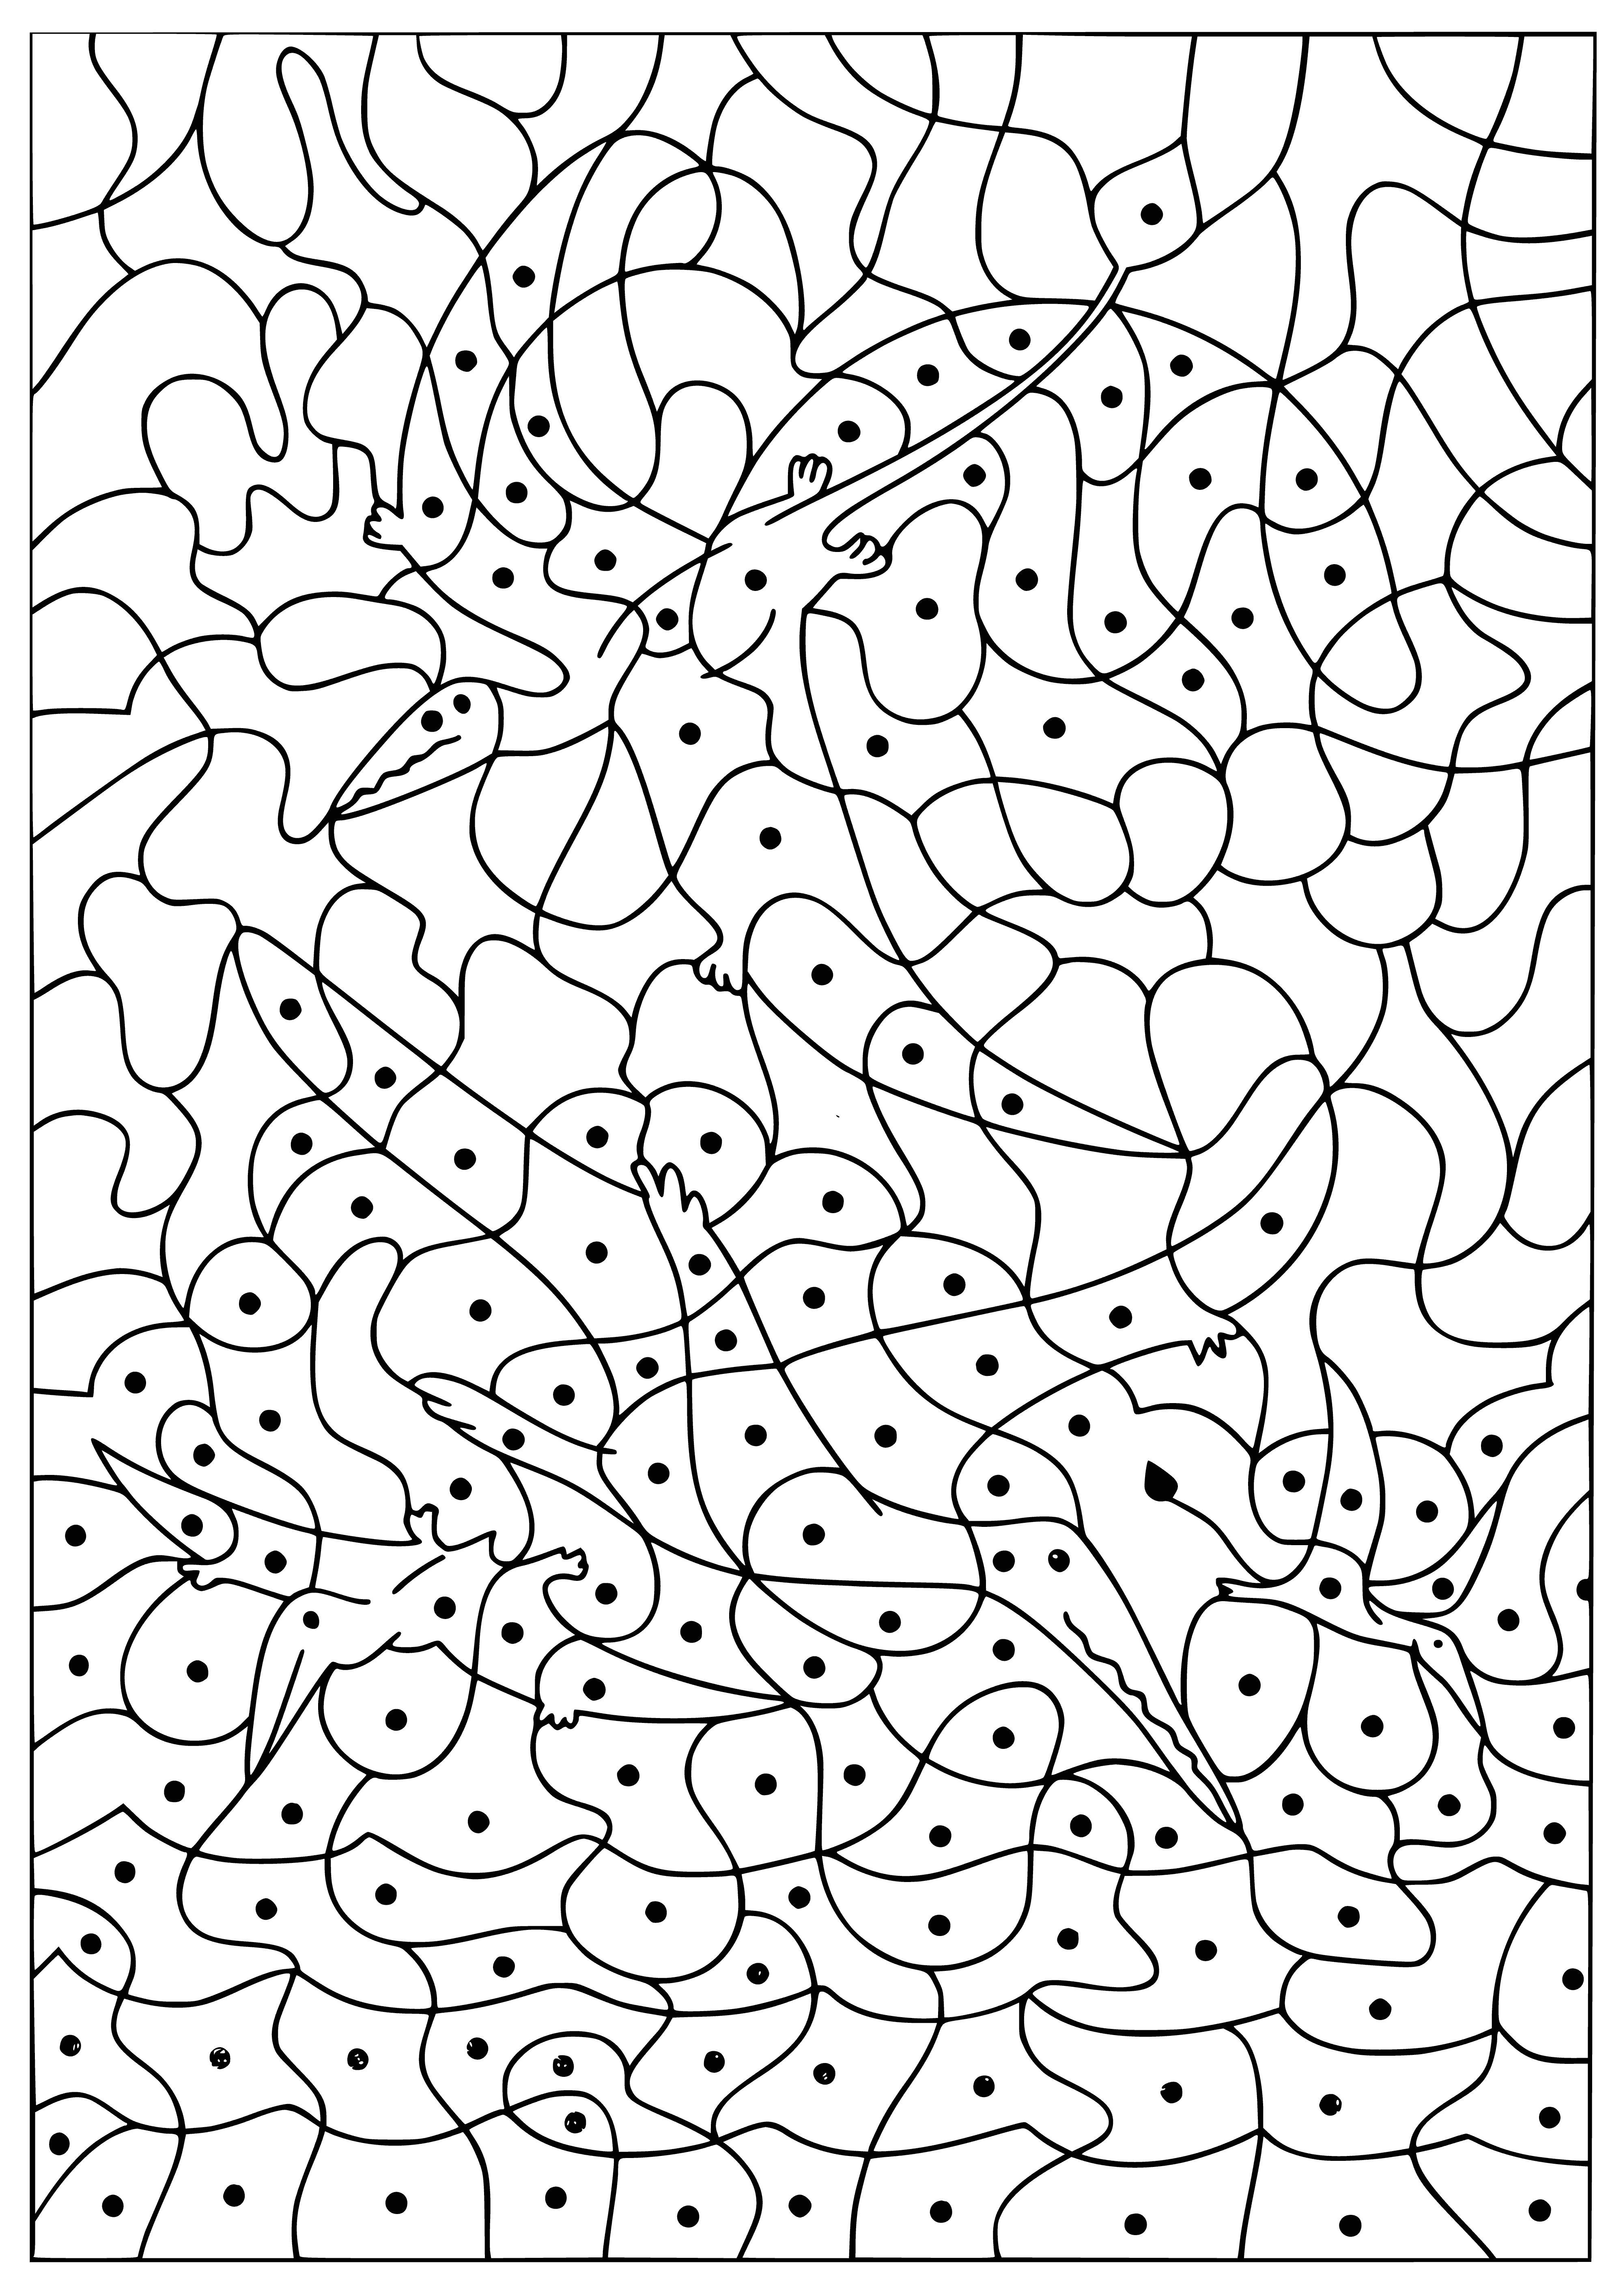 coloring page: Group of bright colored dinosaurs having fun in a landscape of blue sky, green trees & pink flowers.